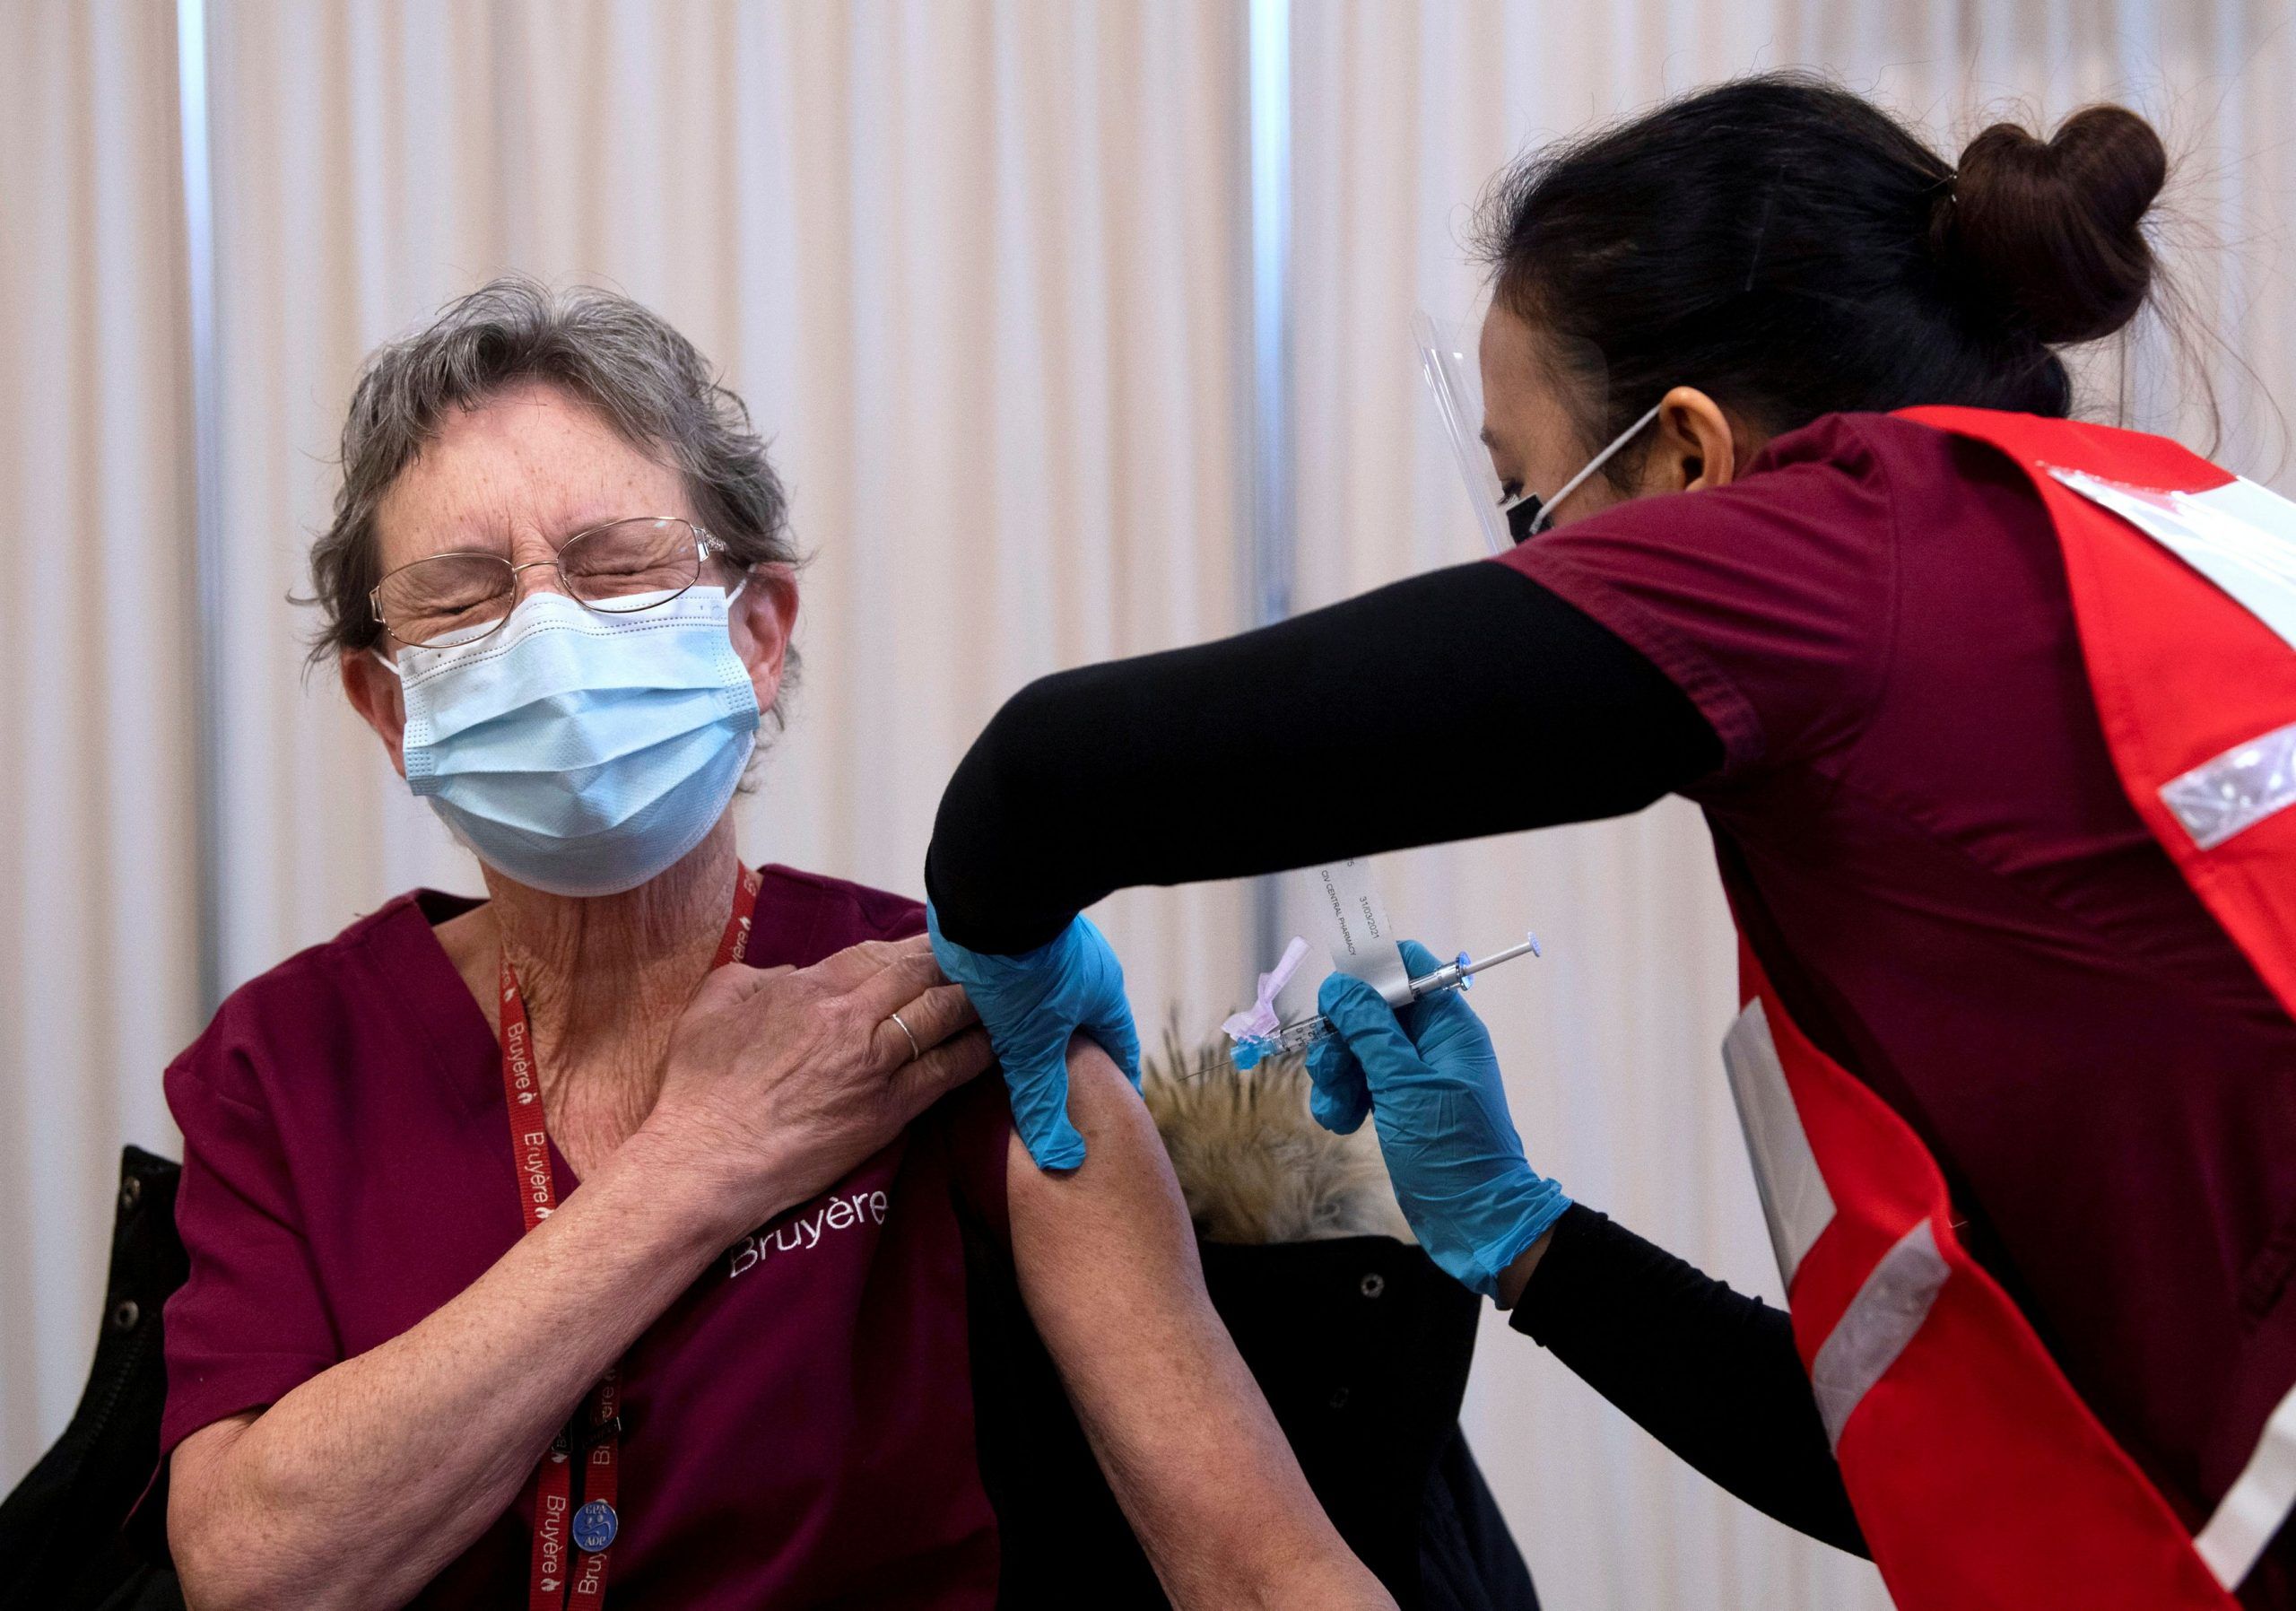 Personal support worker Johanne Lamesse reacts in anticipation to the needle as she receives the Pfizer-BioNTech COVID-19 vaccine at the Civic Hospital in Ottawa, Ontario, Canada December 15, 2020.   